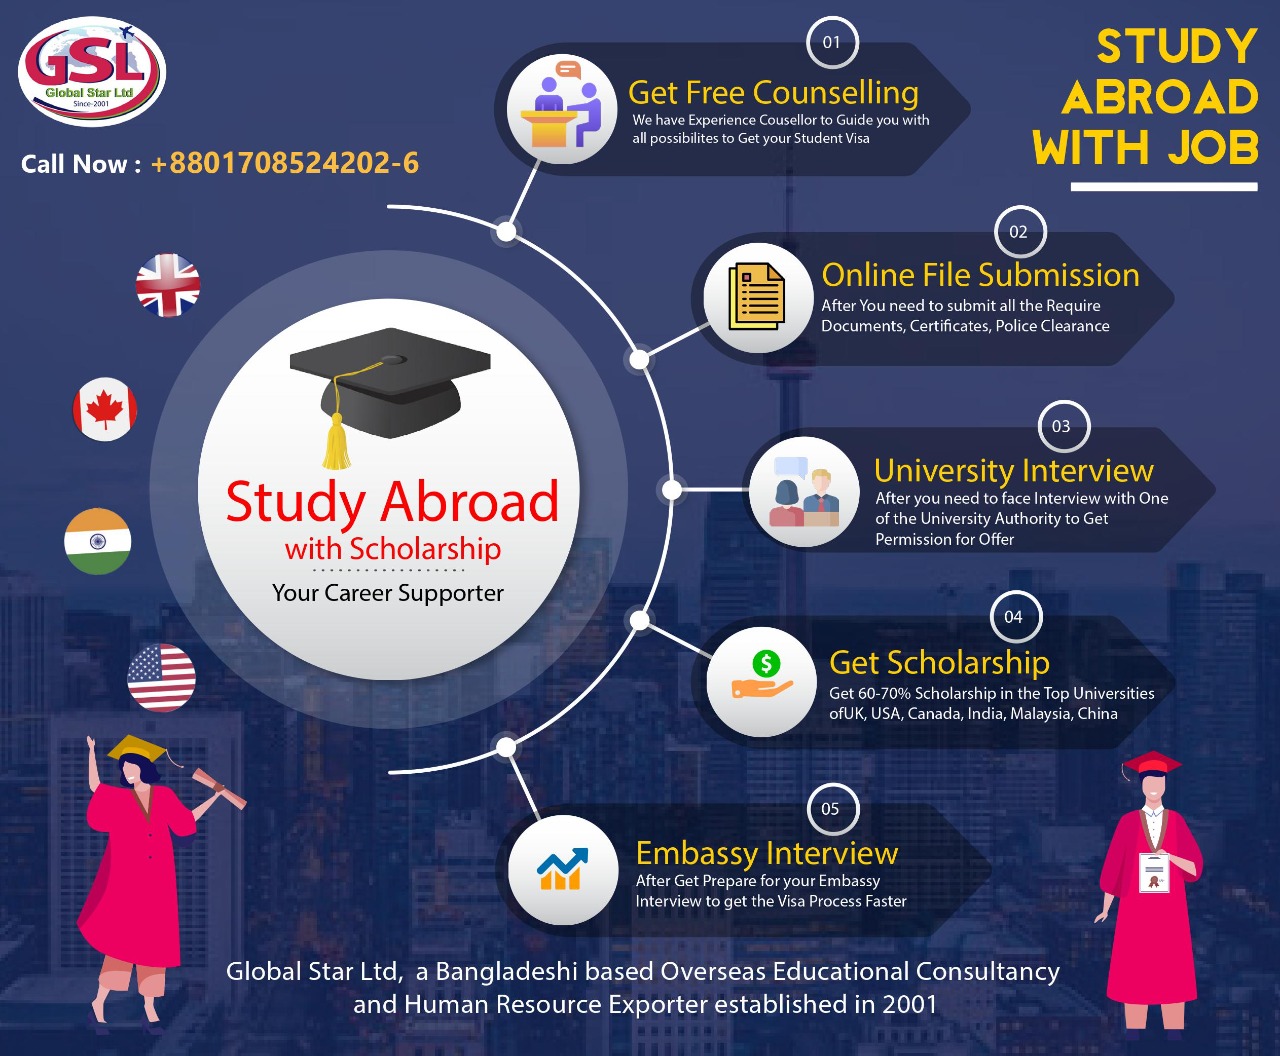 How to Study Abroad from Bangladesh with Job in 2022